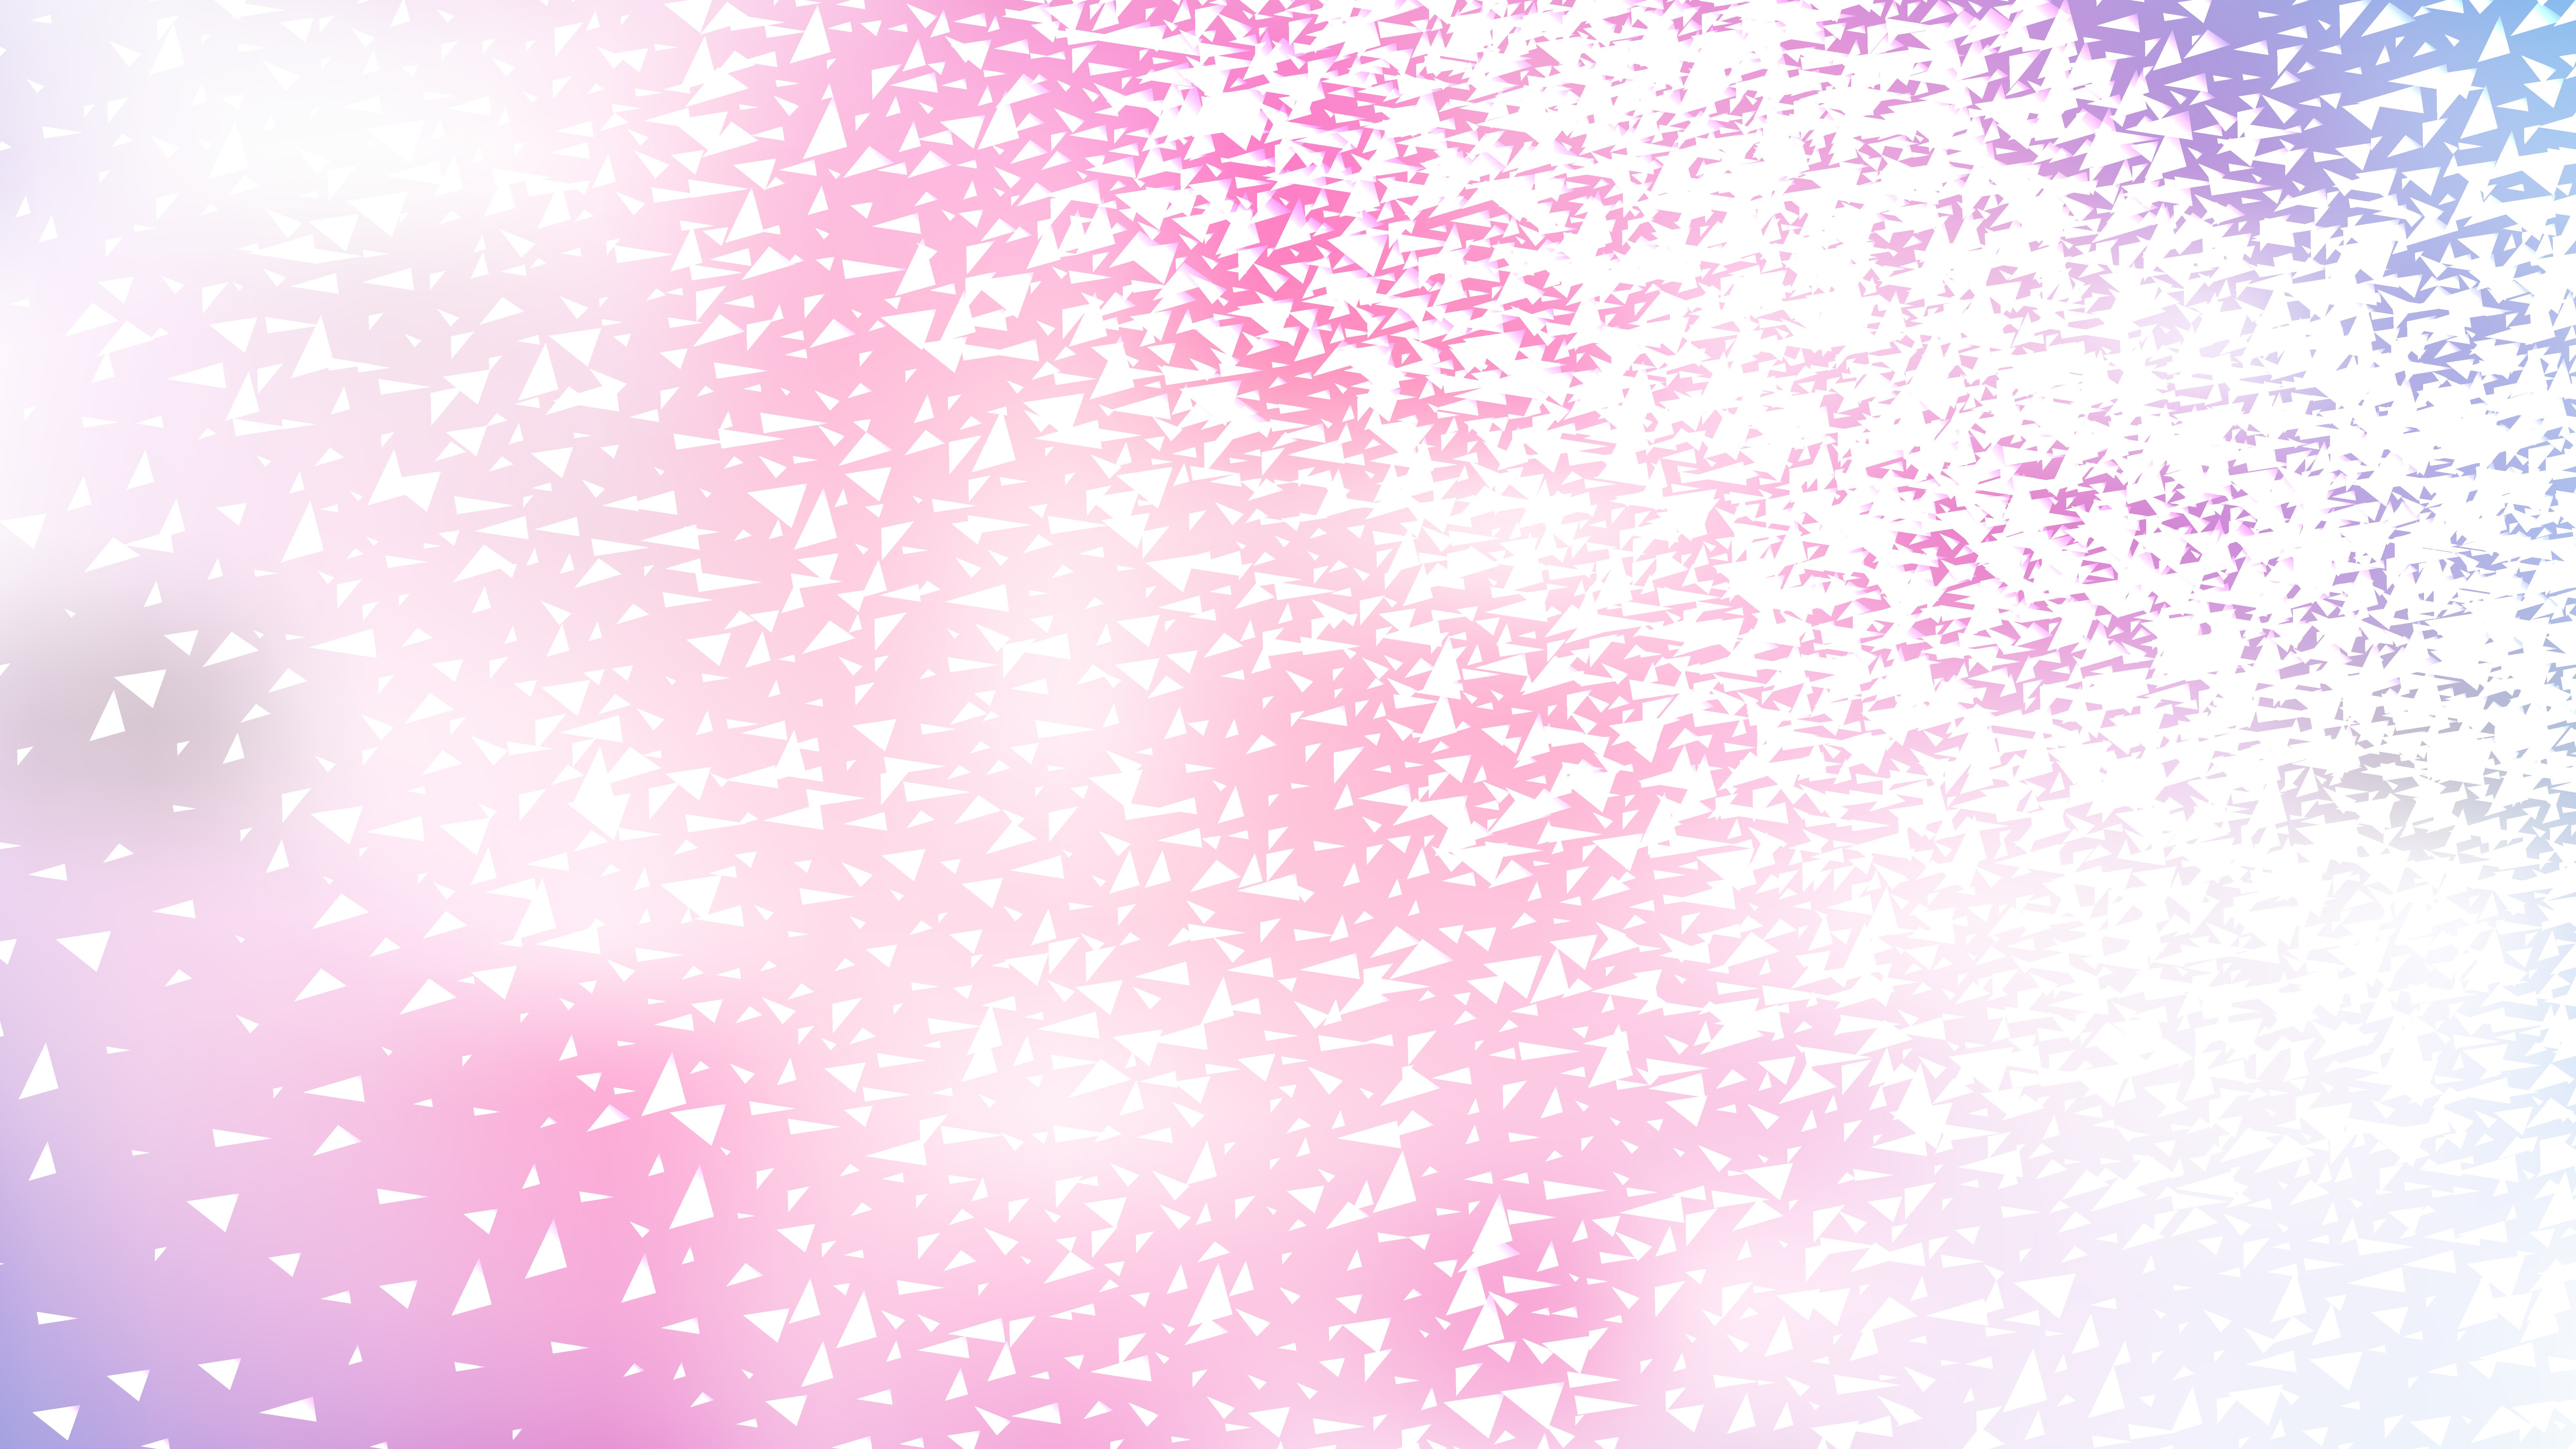 Free Pink and White Sparkling Glitter Background